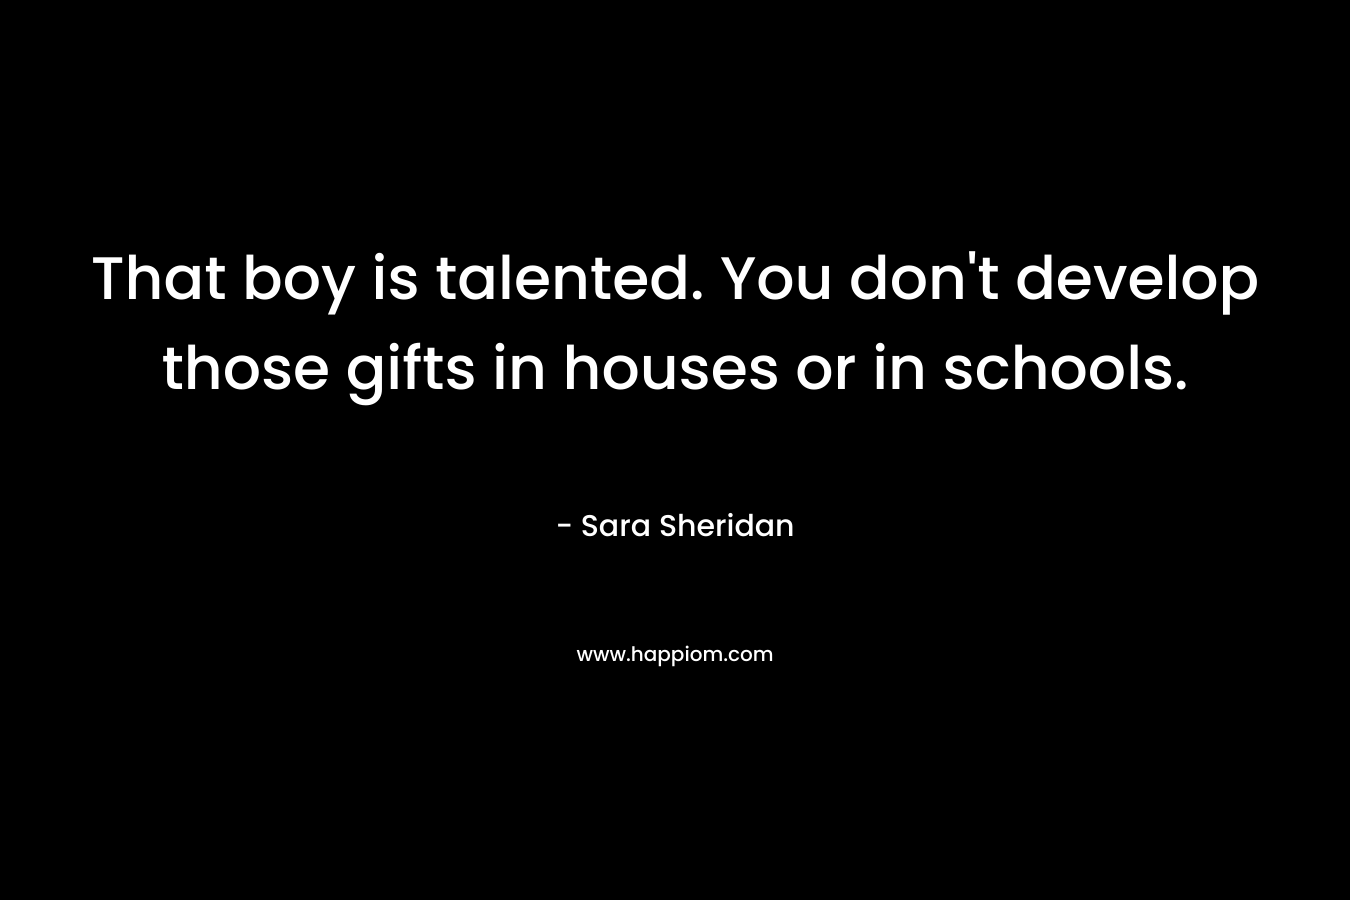 That boy is talented. You don't develop those gifts in houses or in schools.